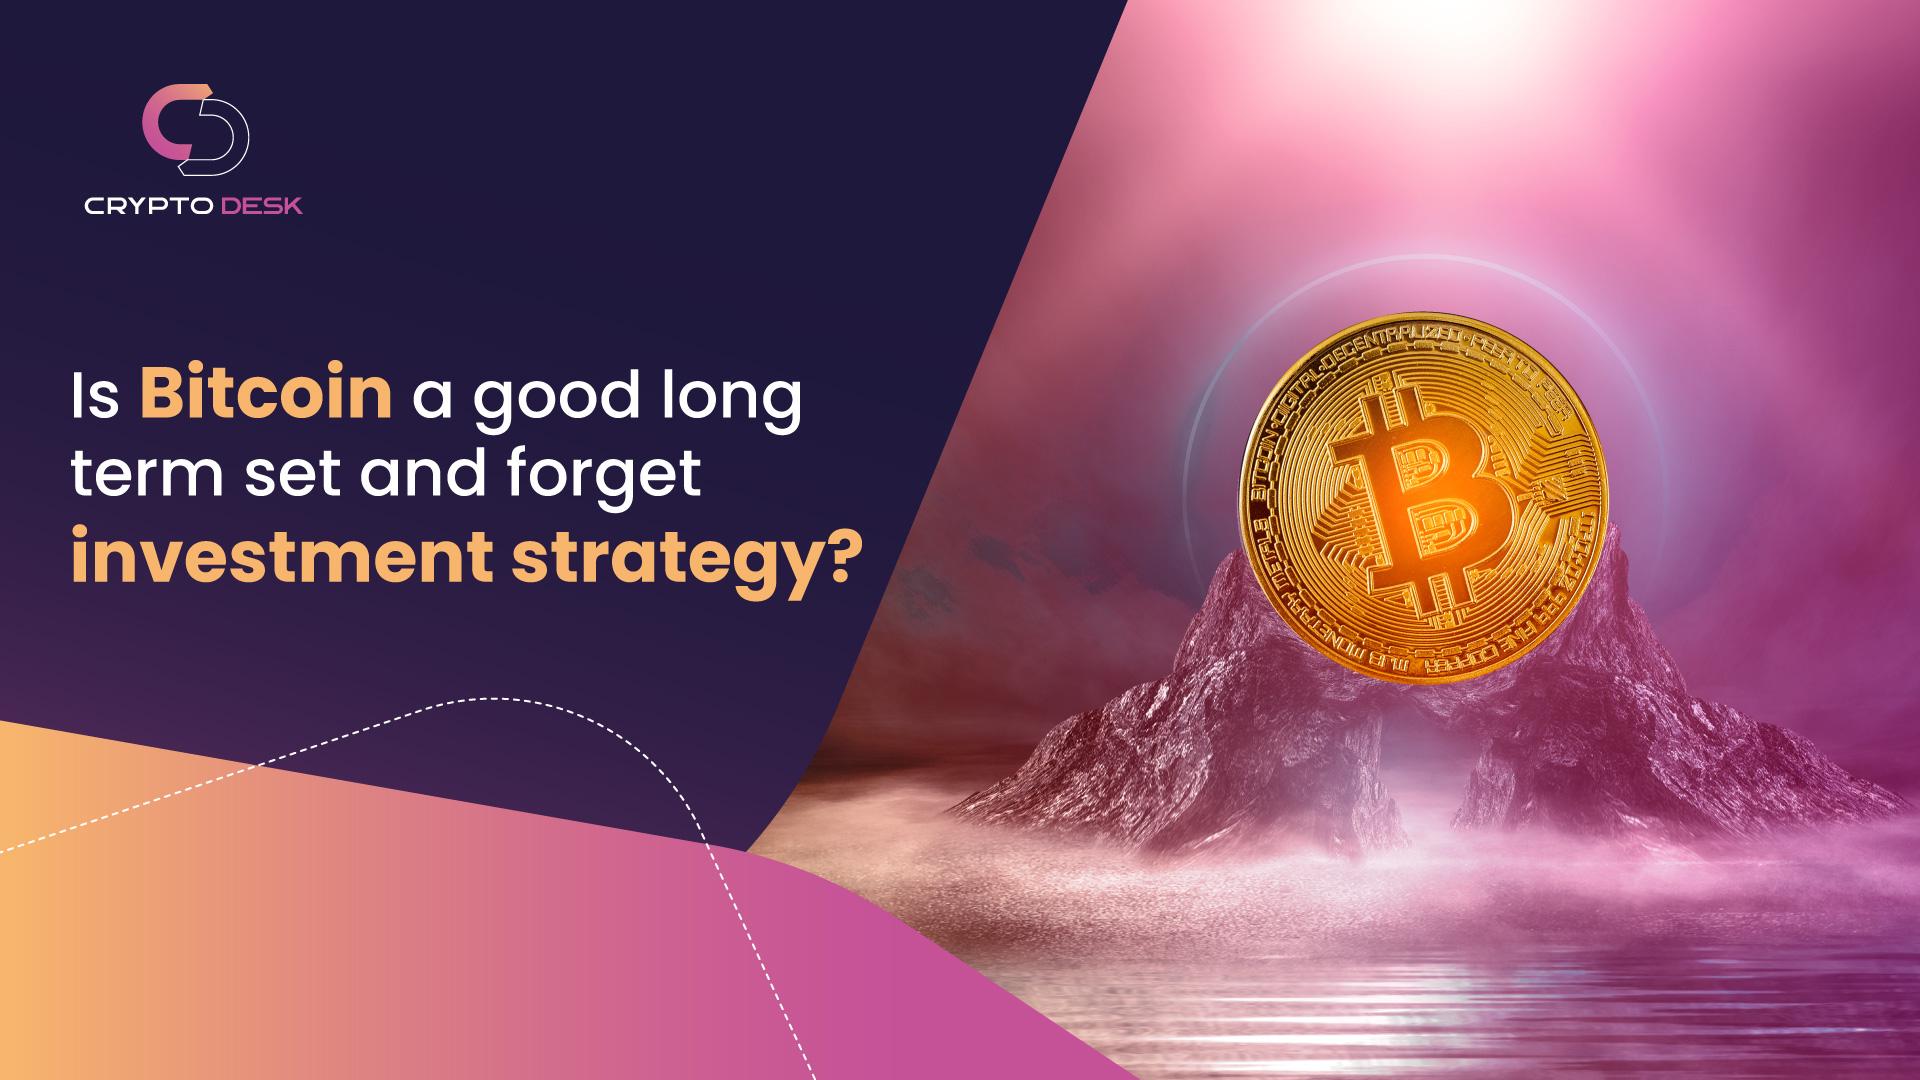 Is bitcoin a good long term set and forget investment strategy? - Cryptodesk